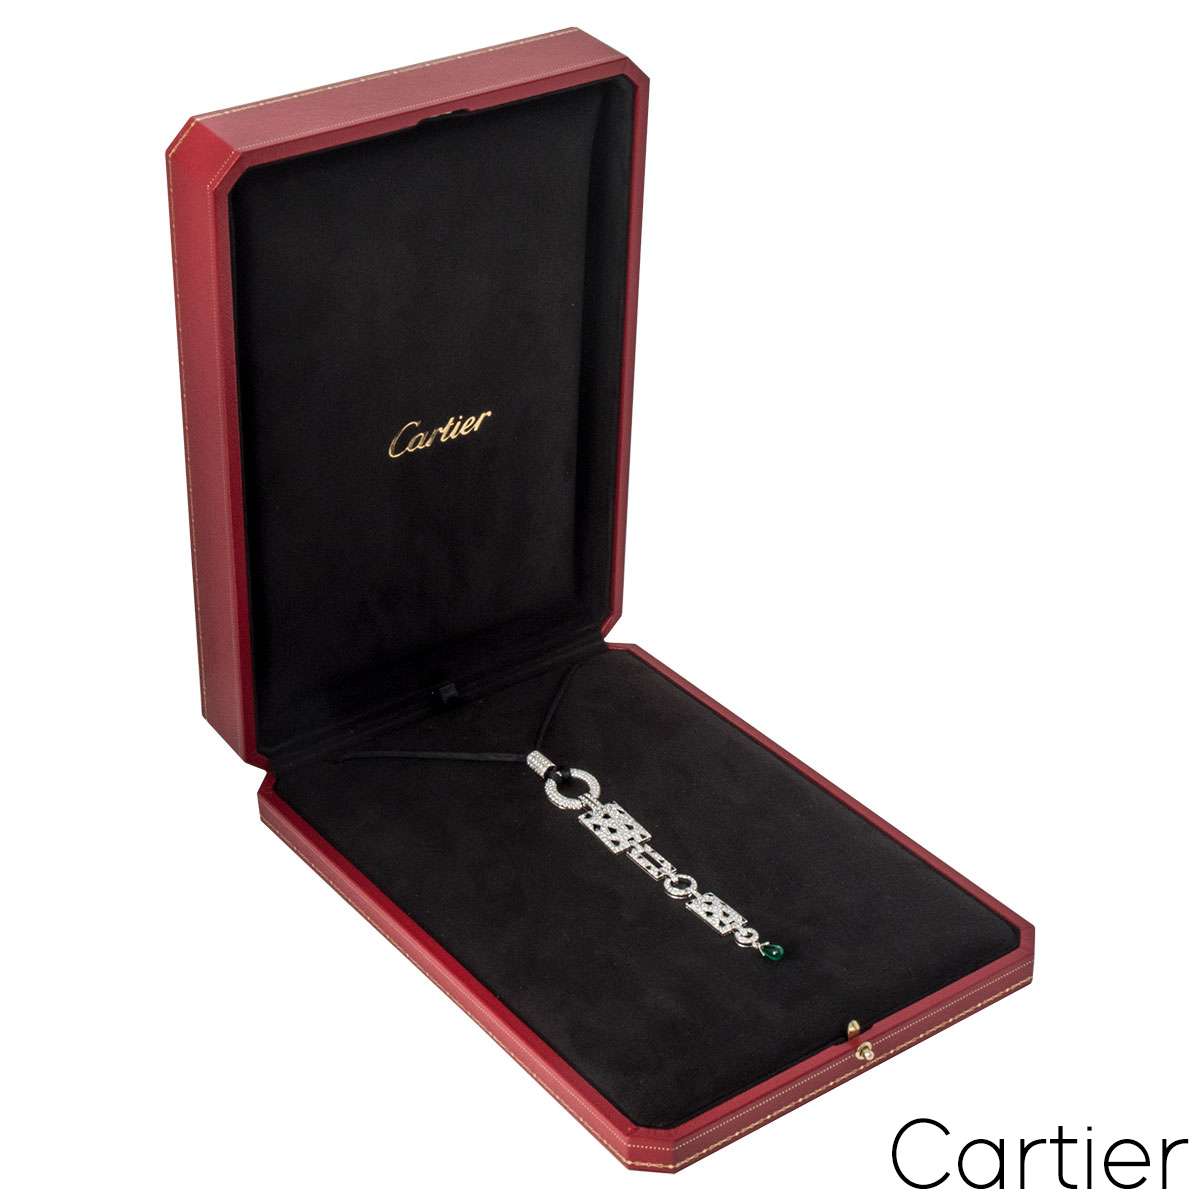 Cartier White Gold Diamond Panthere Necklace N3014700